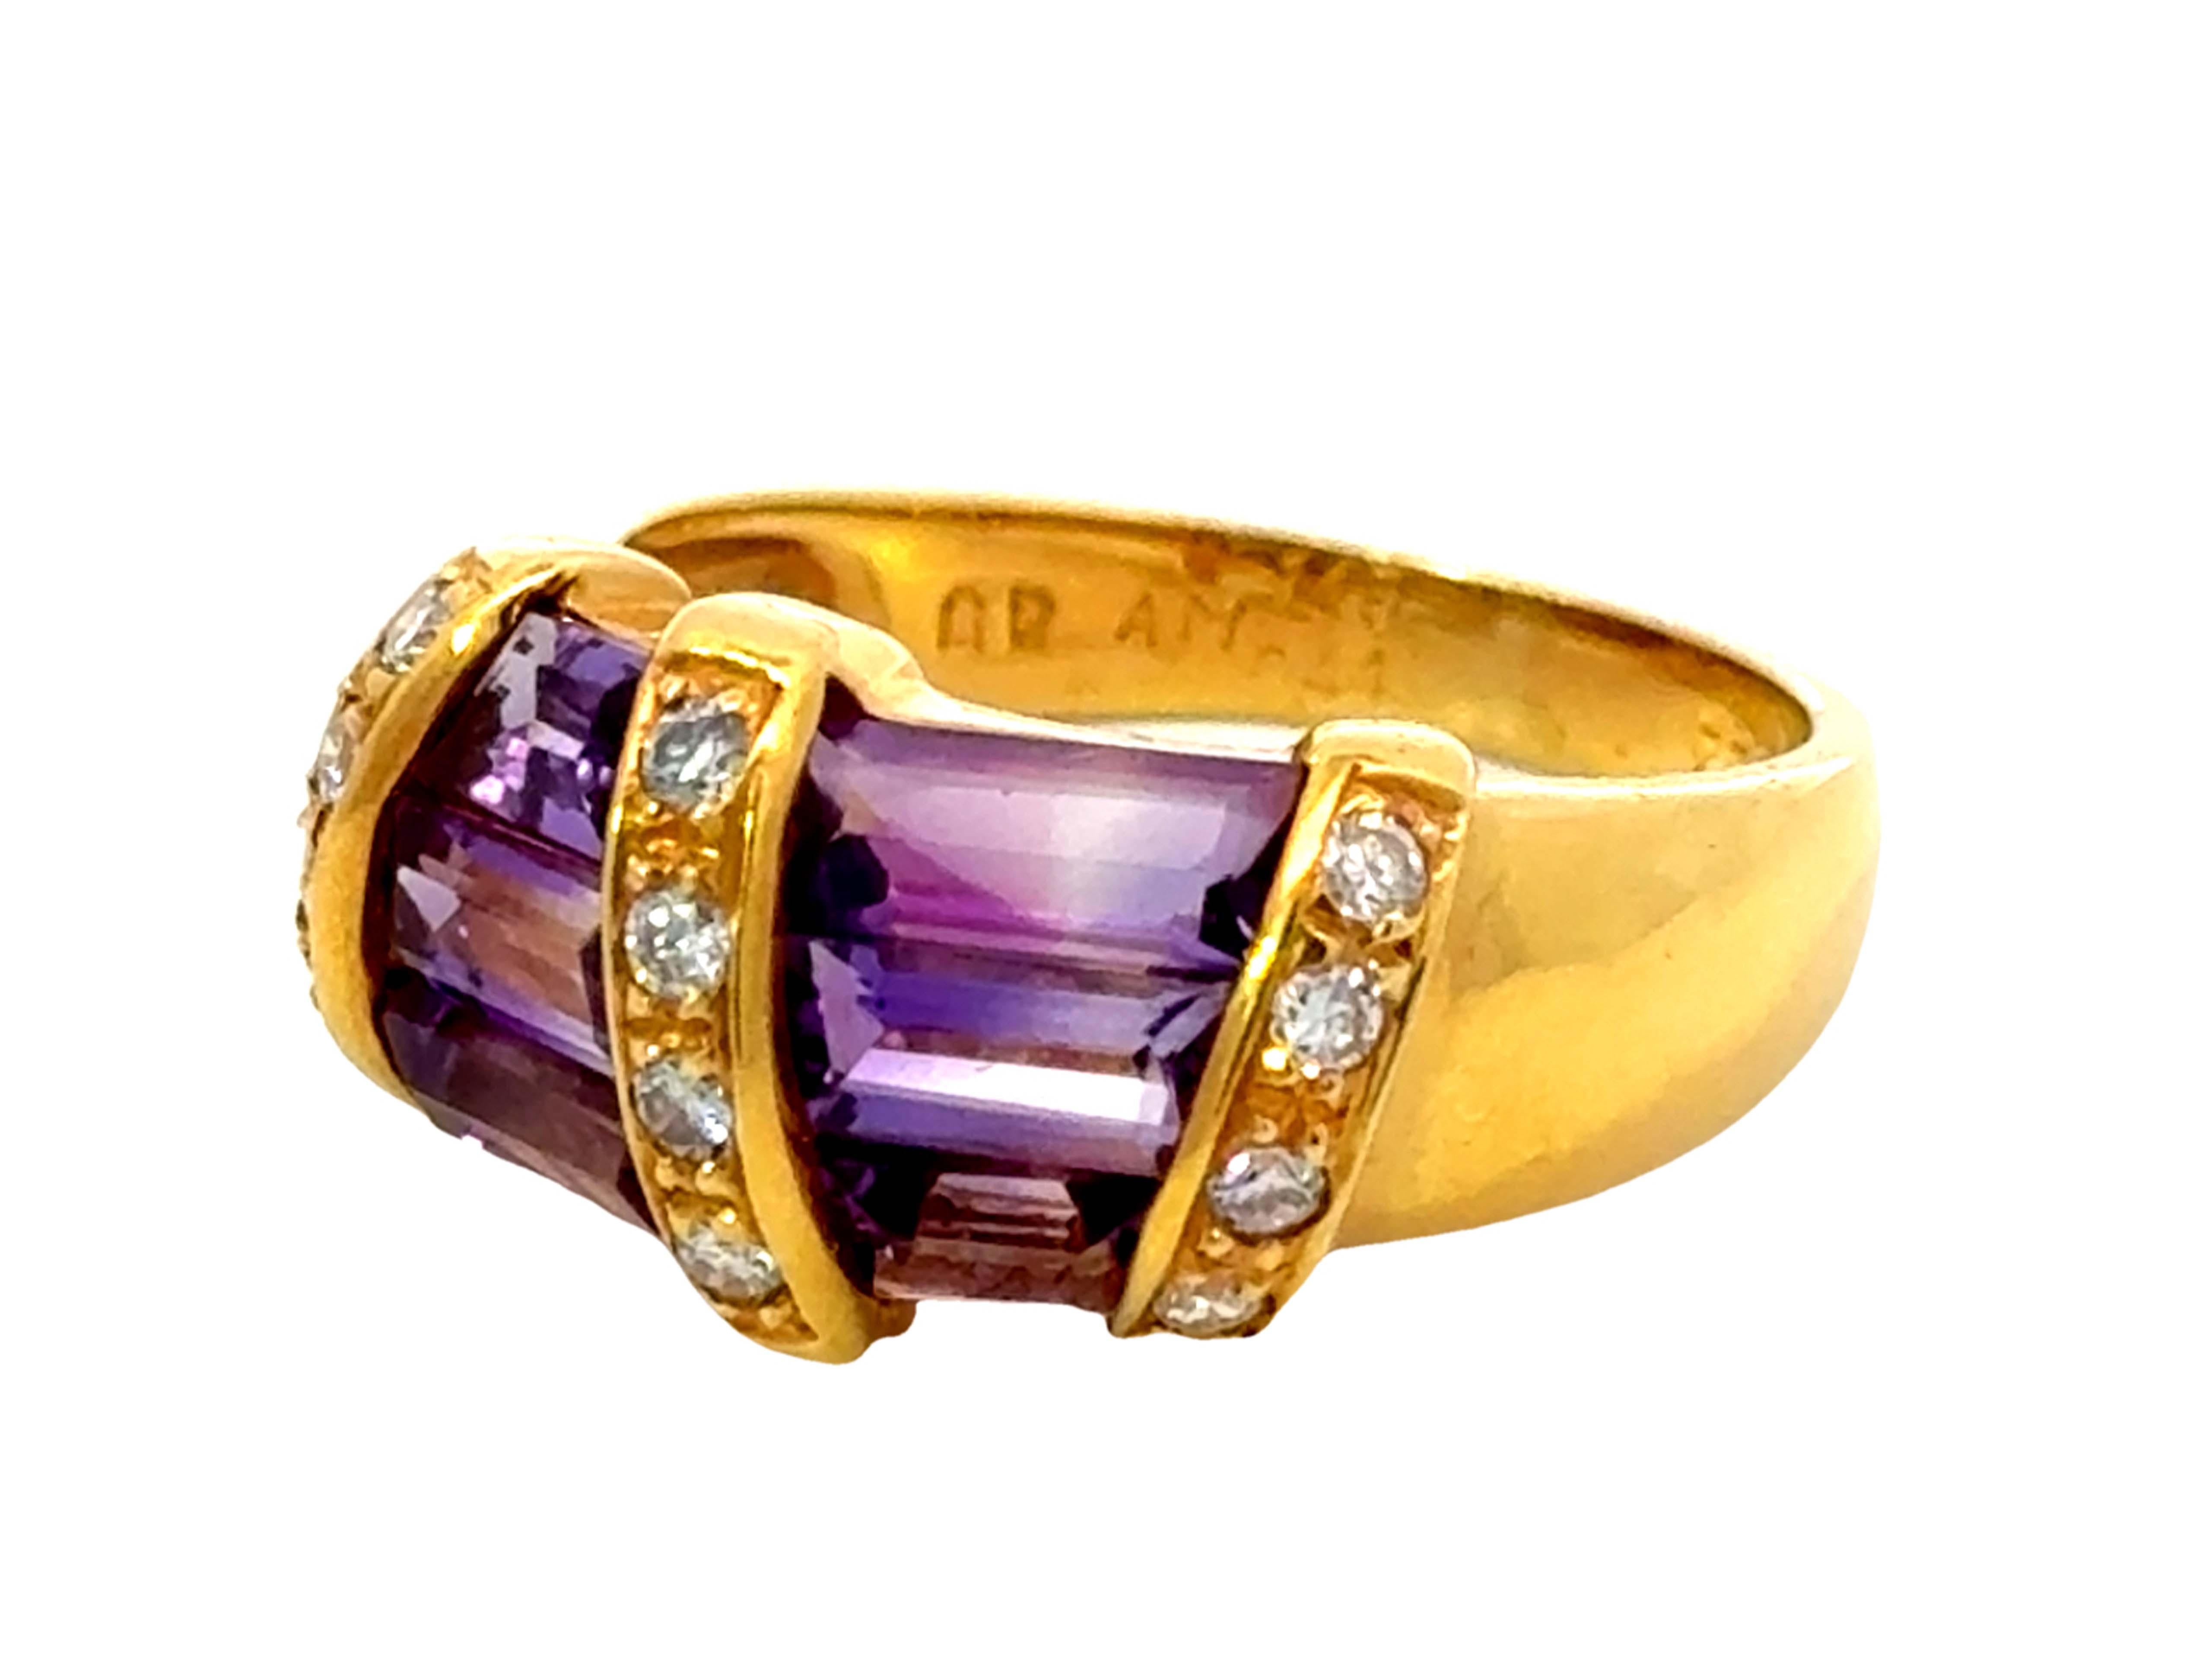 Emerald Cut Amethyst Diamond Band Ring 18k Yellow Gold For Sale